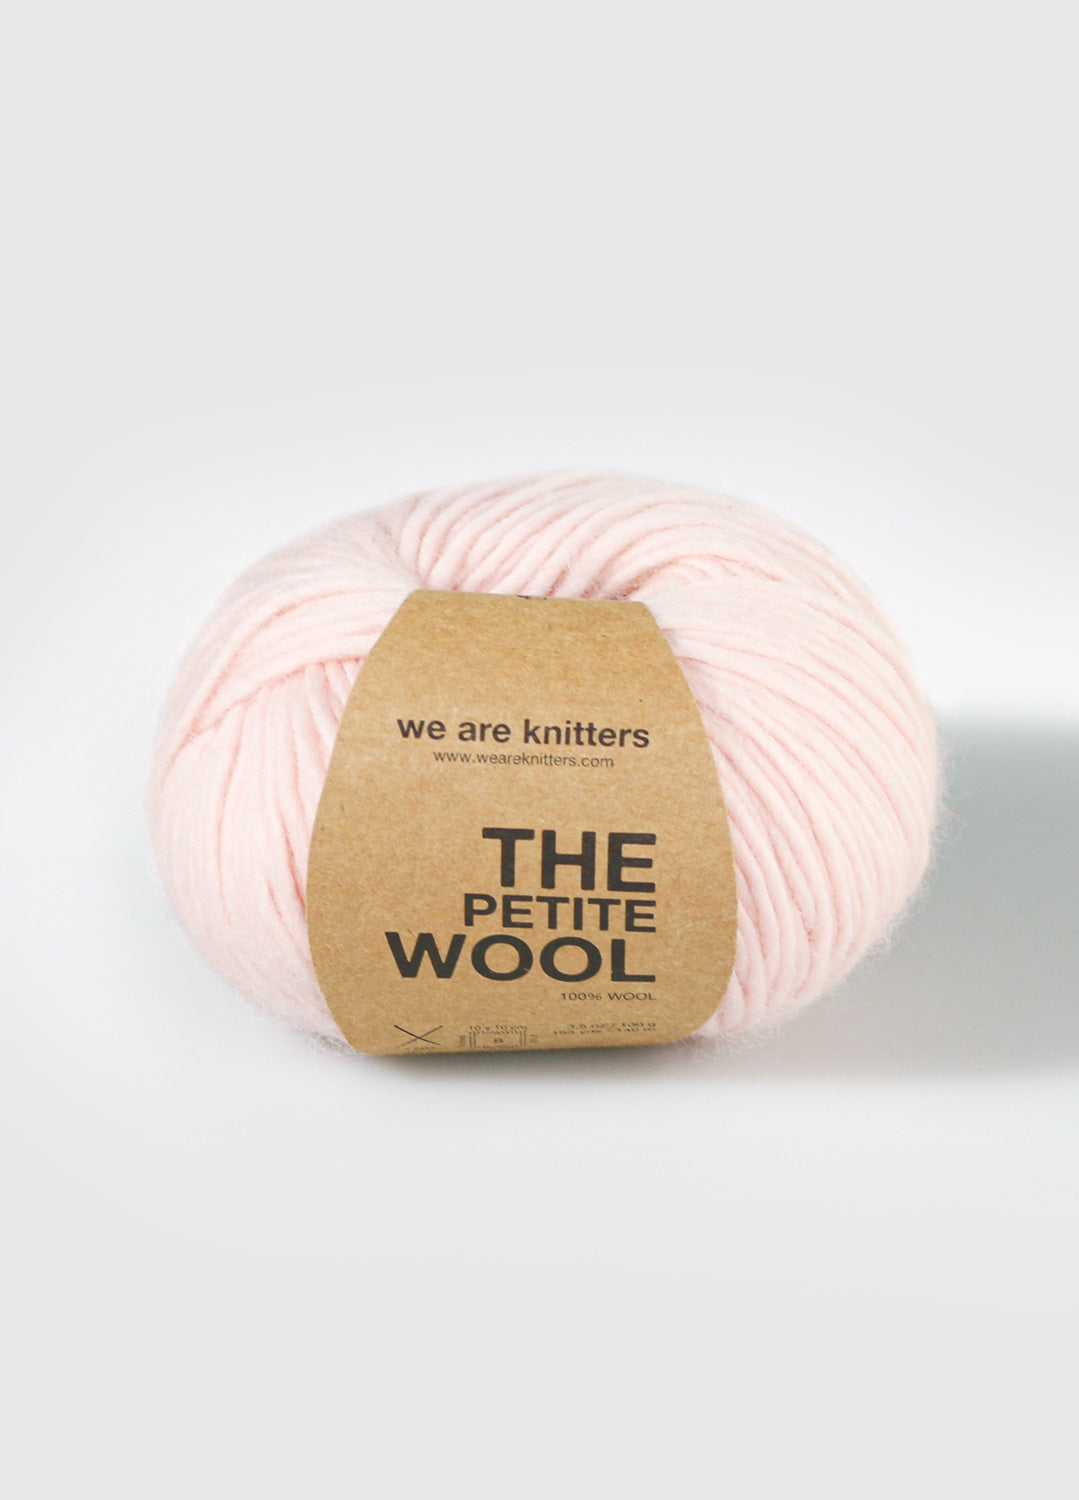 The Squishy Yarn Sage Green – We are knitters